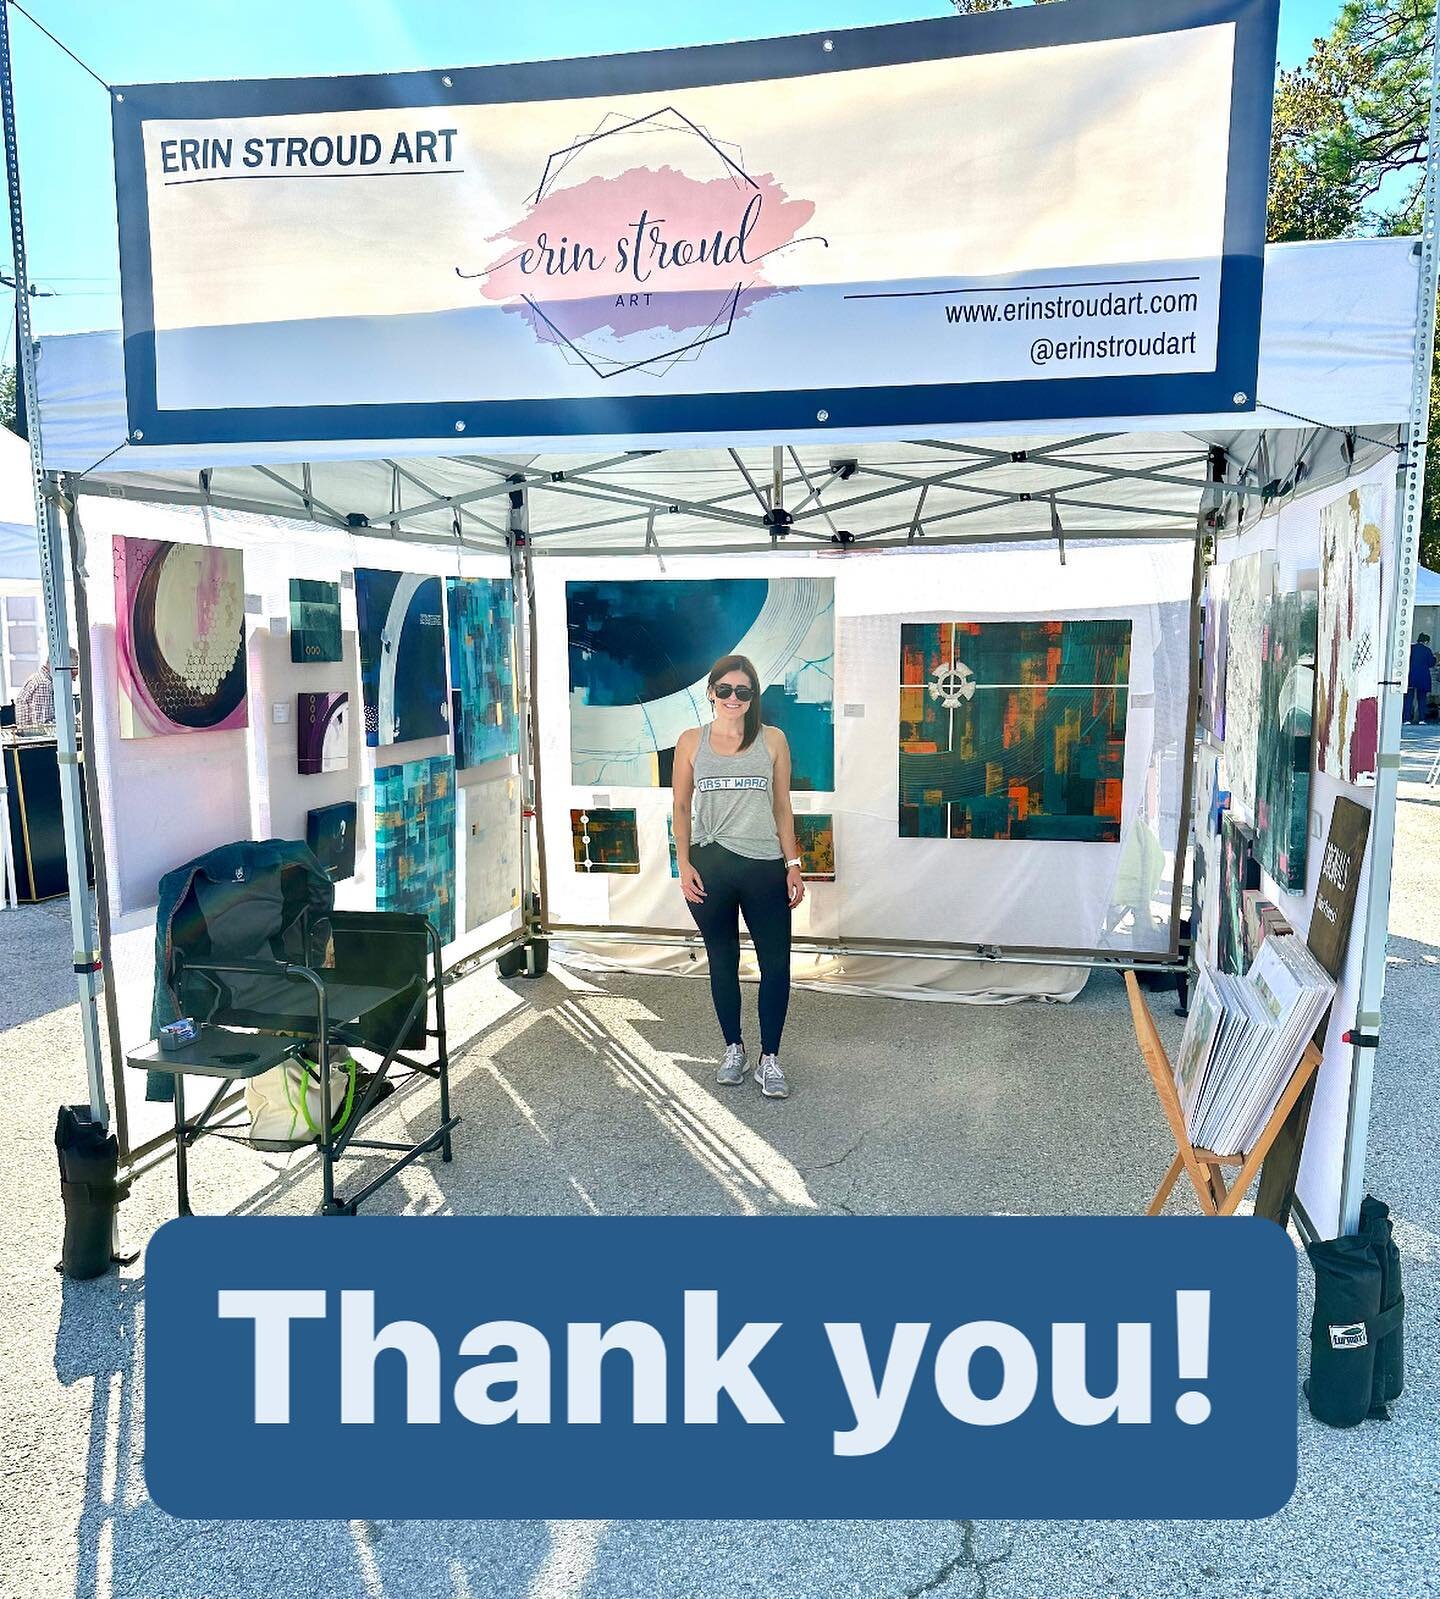 Thank you to everyone who came out to the First Saturday Arts Market yesterday! The weather was great, I met so many lovely people, and my painting &ldquo;Reach Out&rdquo; (scroll to see) found a new home. All in all, an awesome day! You can find me 